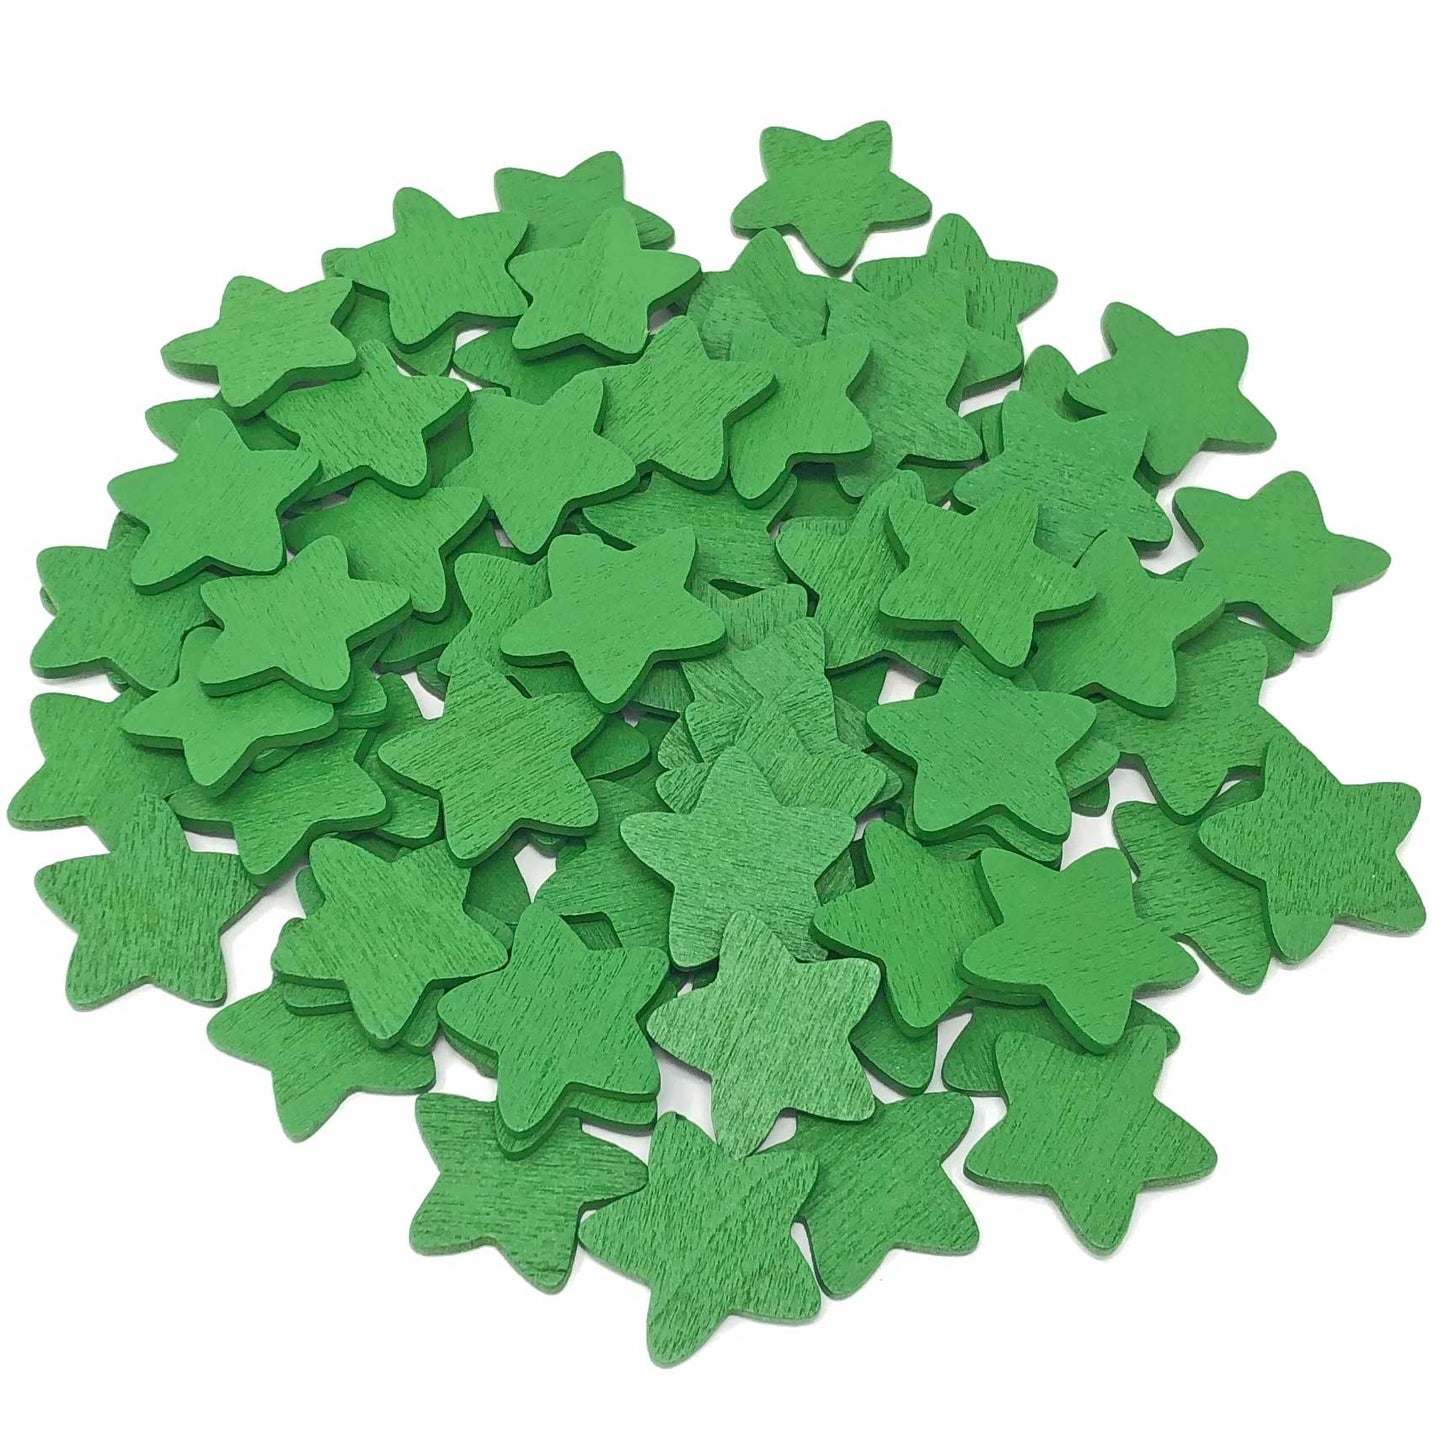 Green 18mm Wooden Craft Coloured Stars